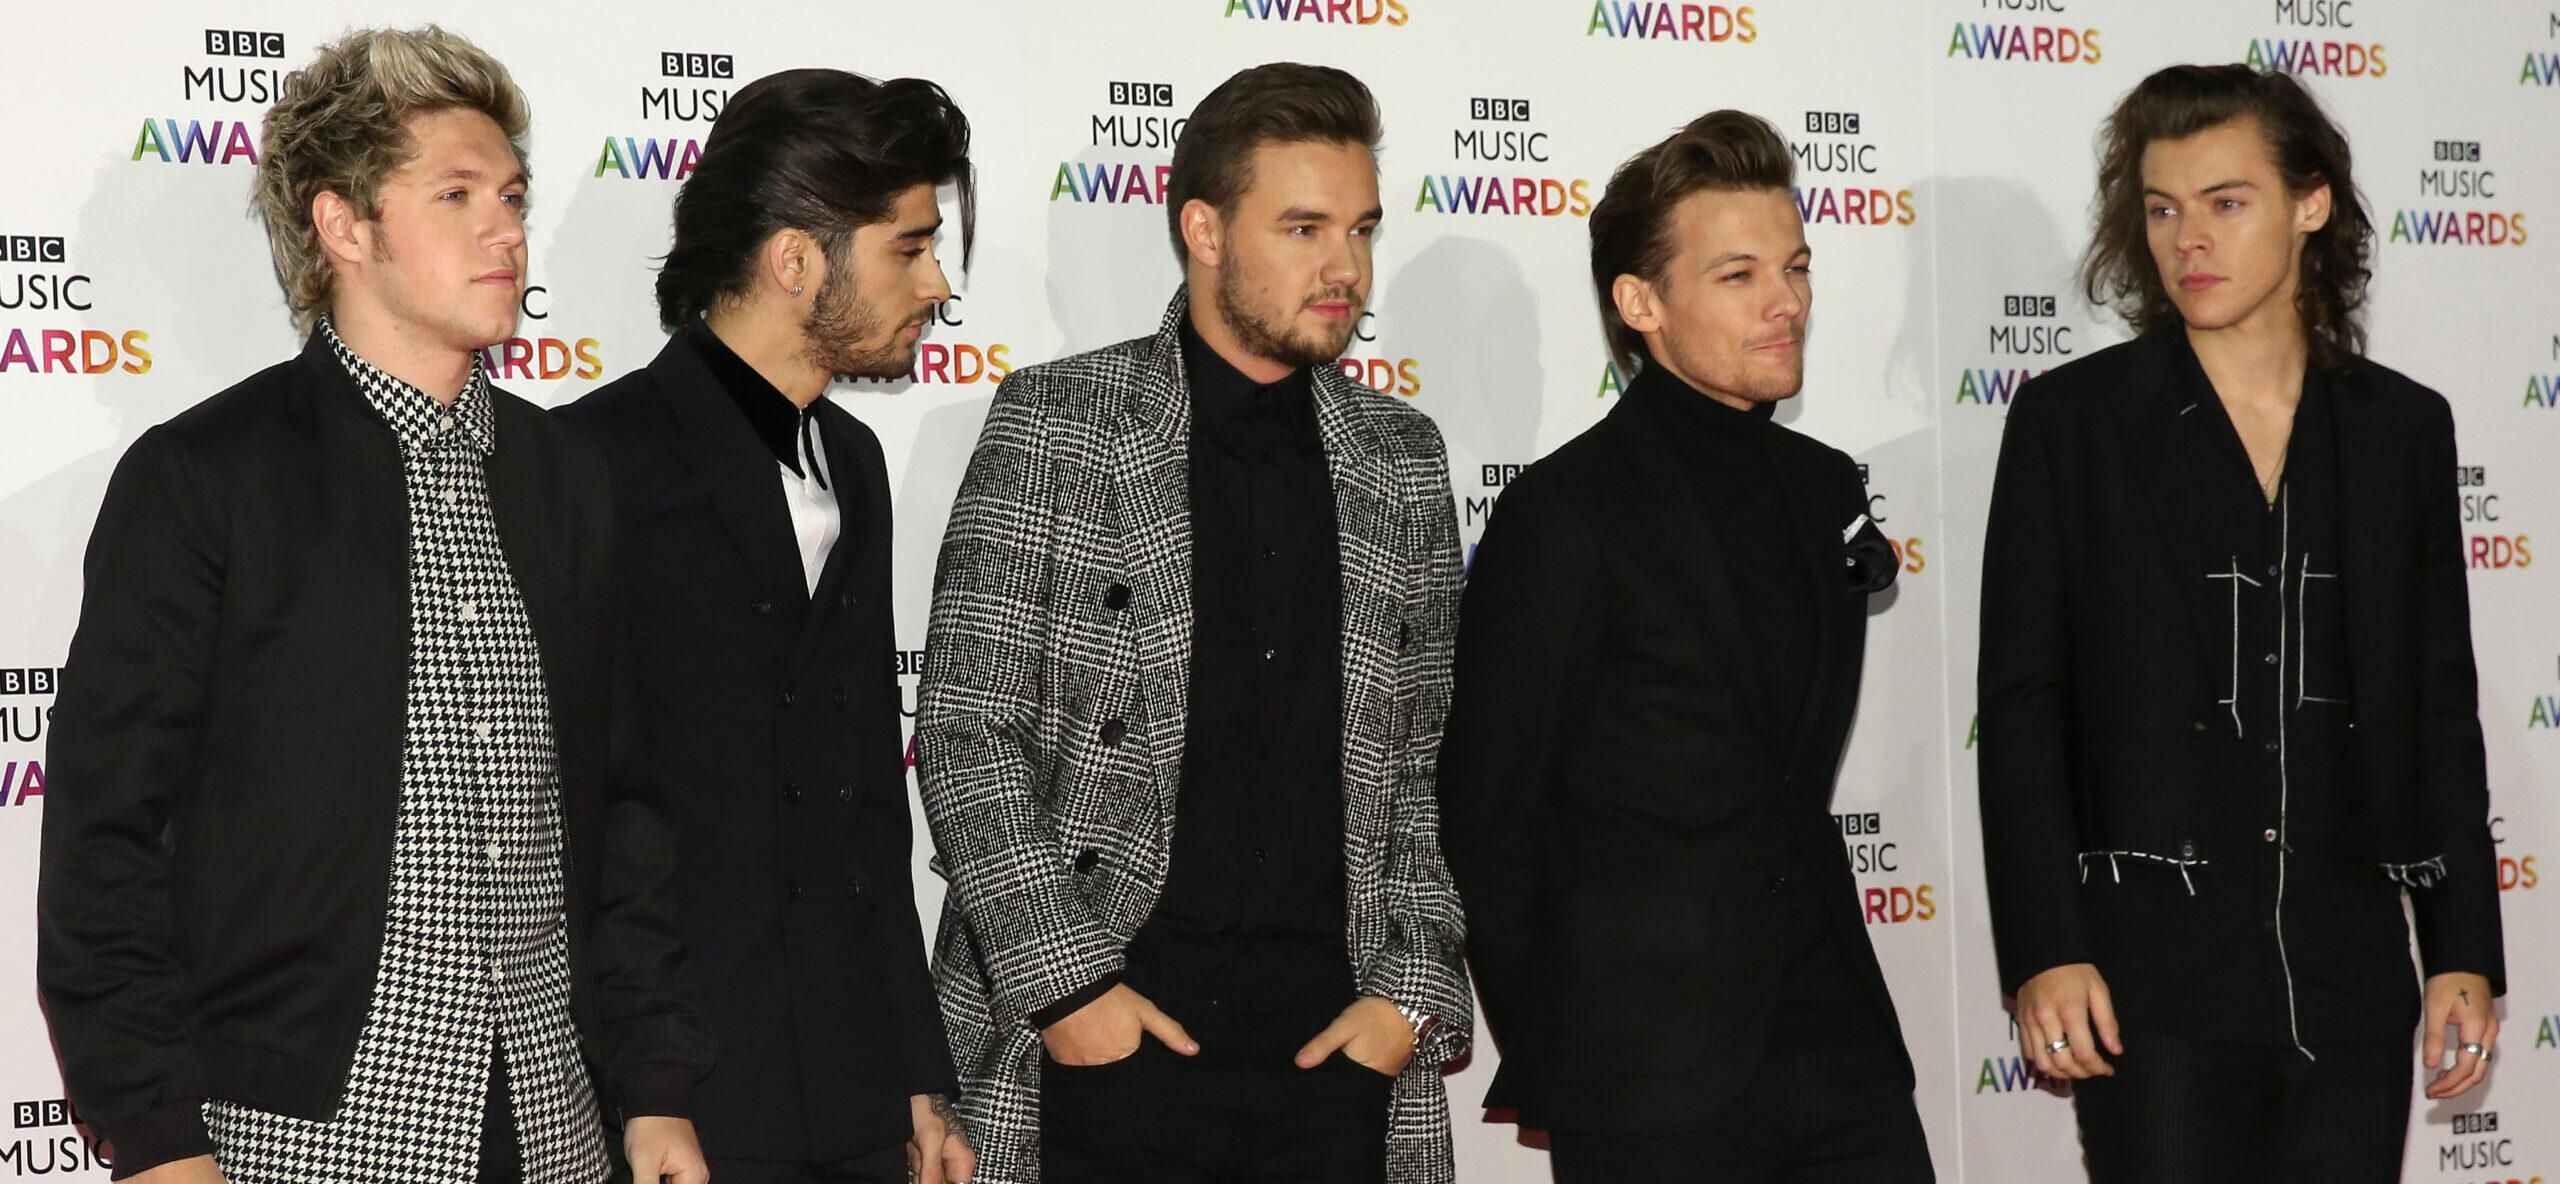 Liam Payne Opens Up About His Days In One Direction And How It Left Him With ‘Scars’